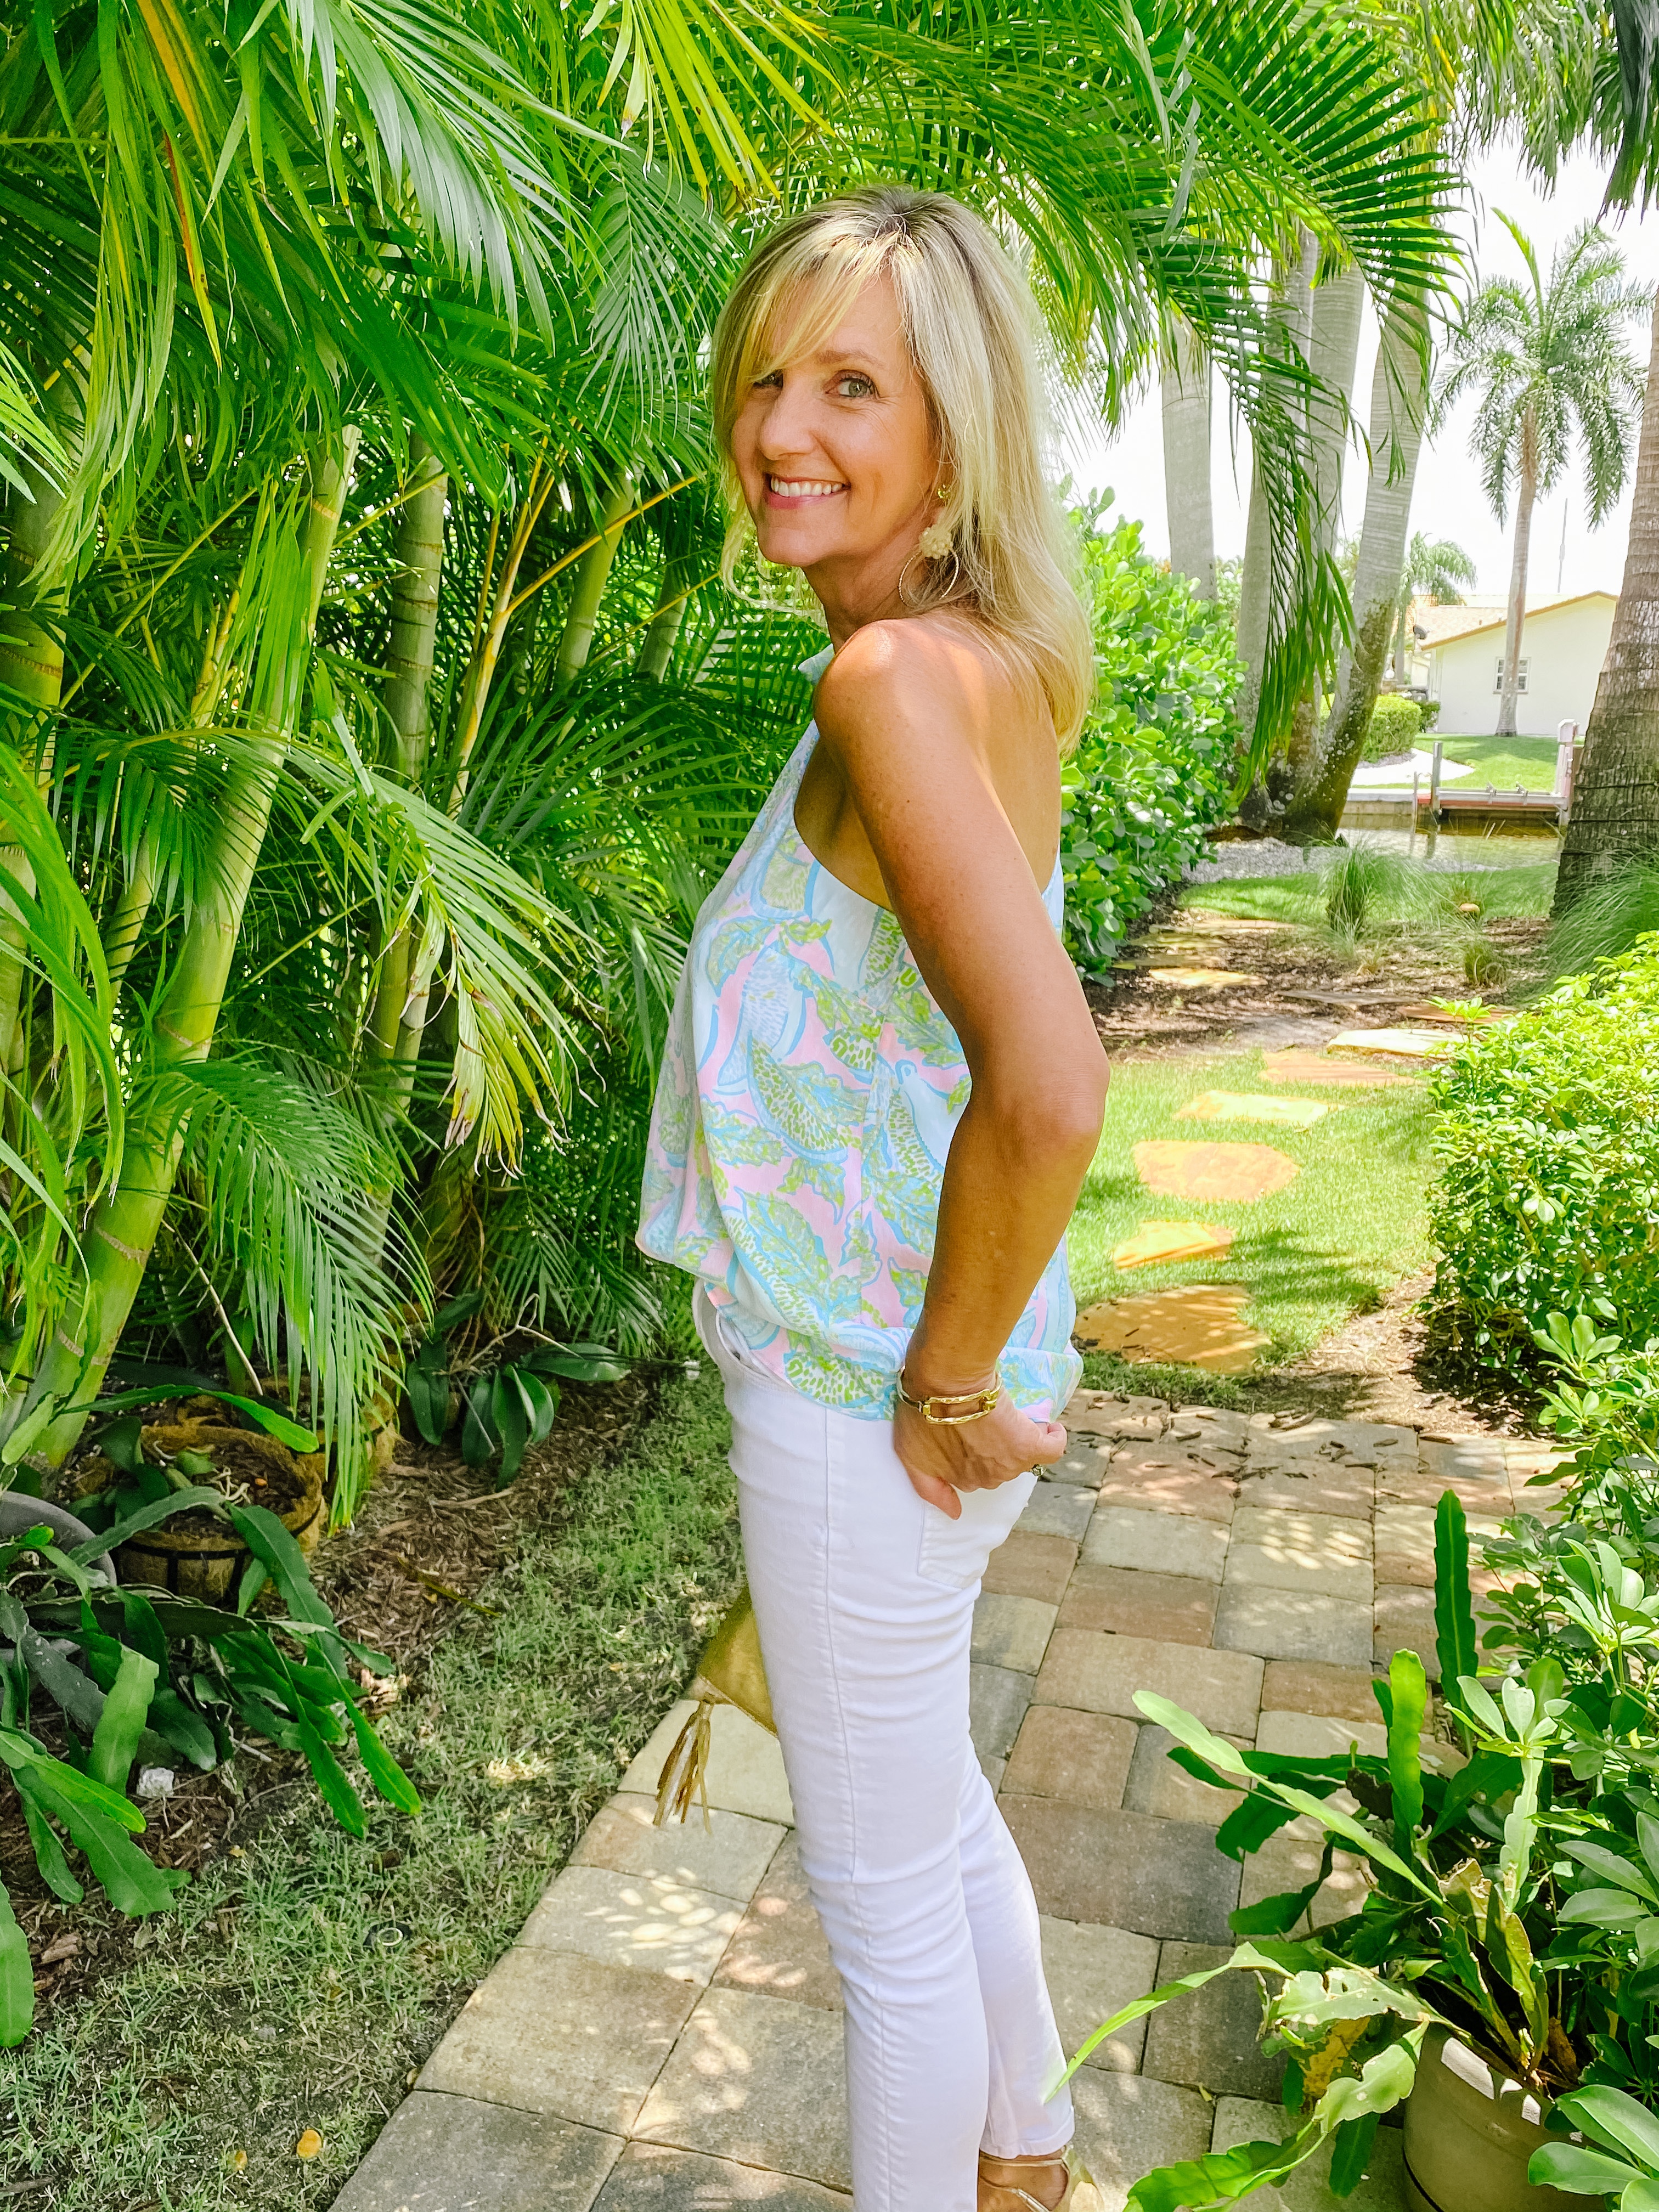 Lilly Pulitzer Holiday Gift Guide